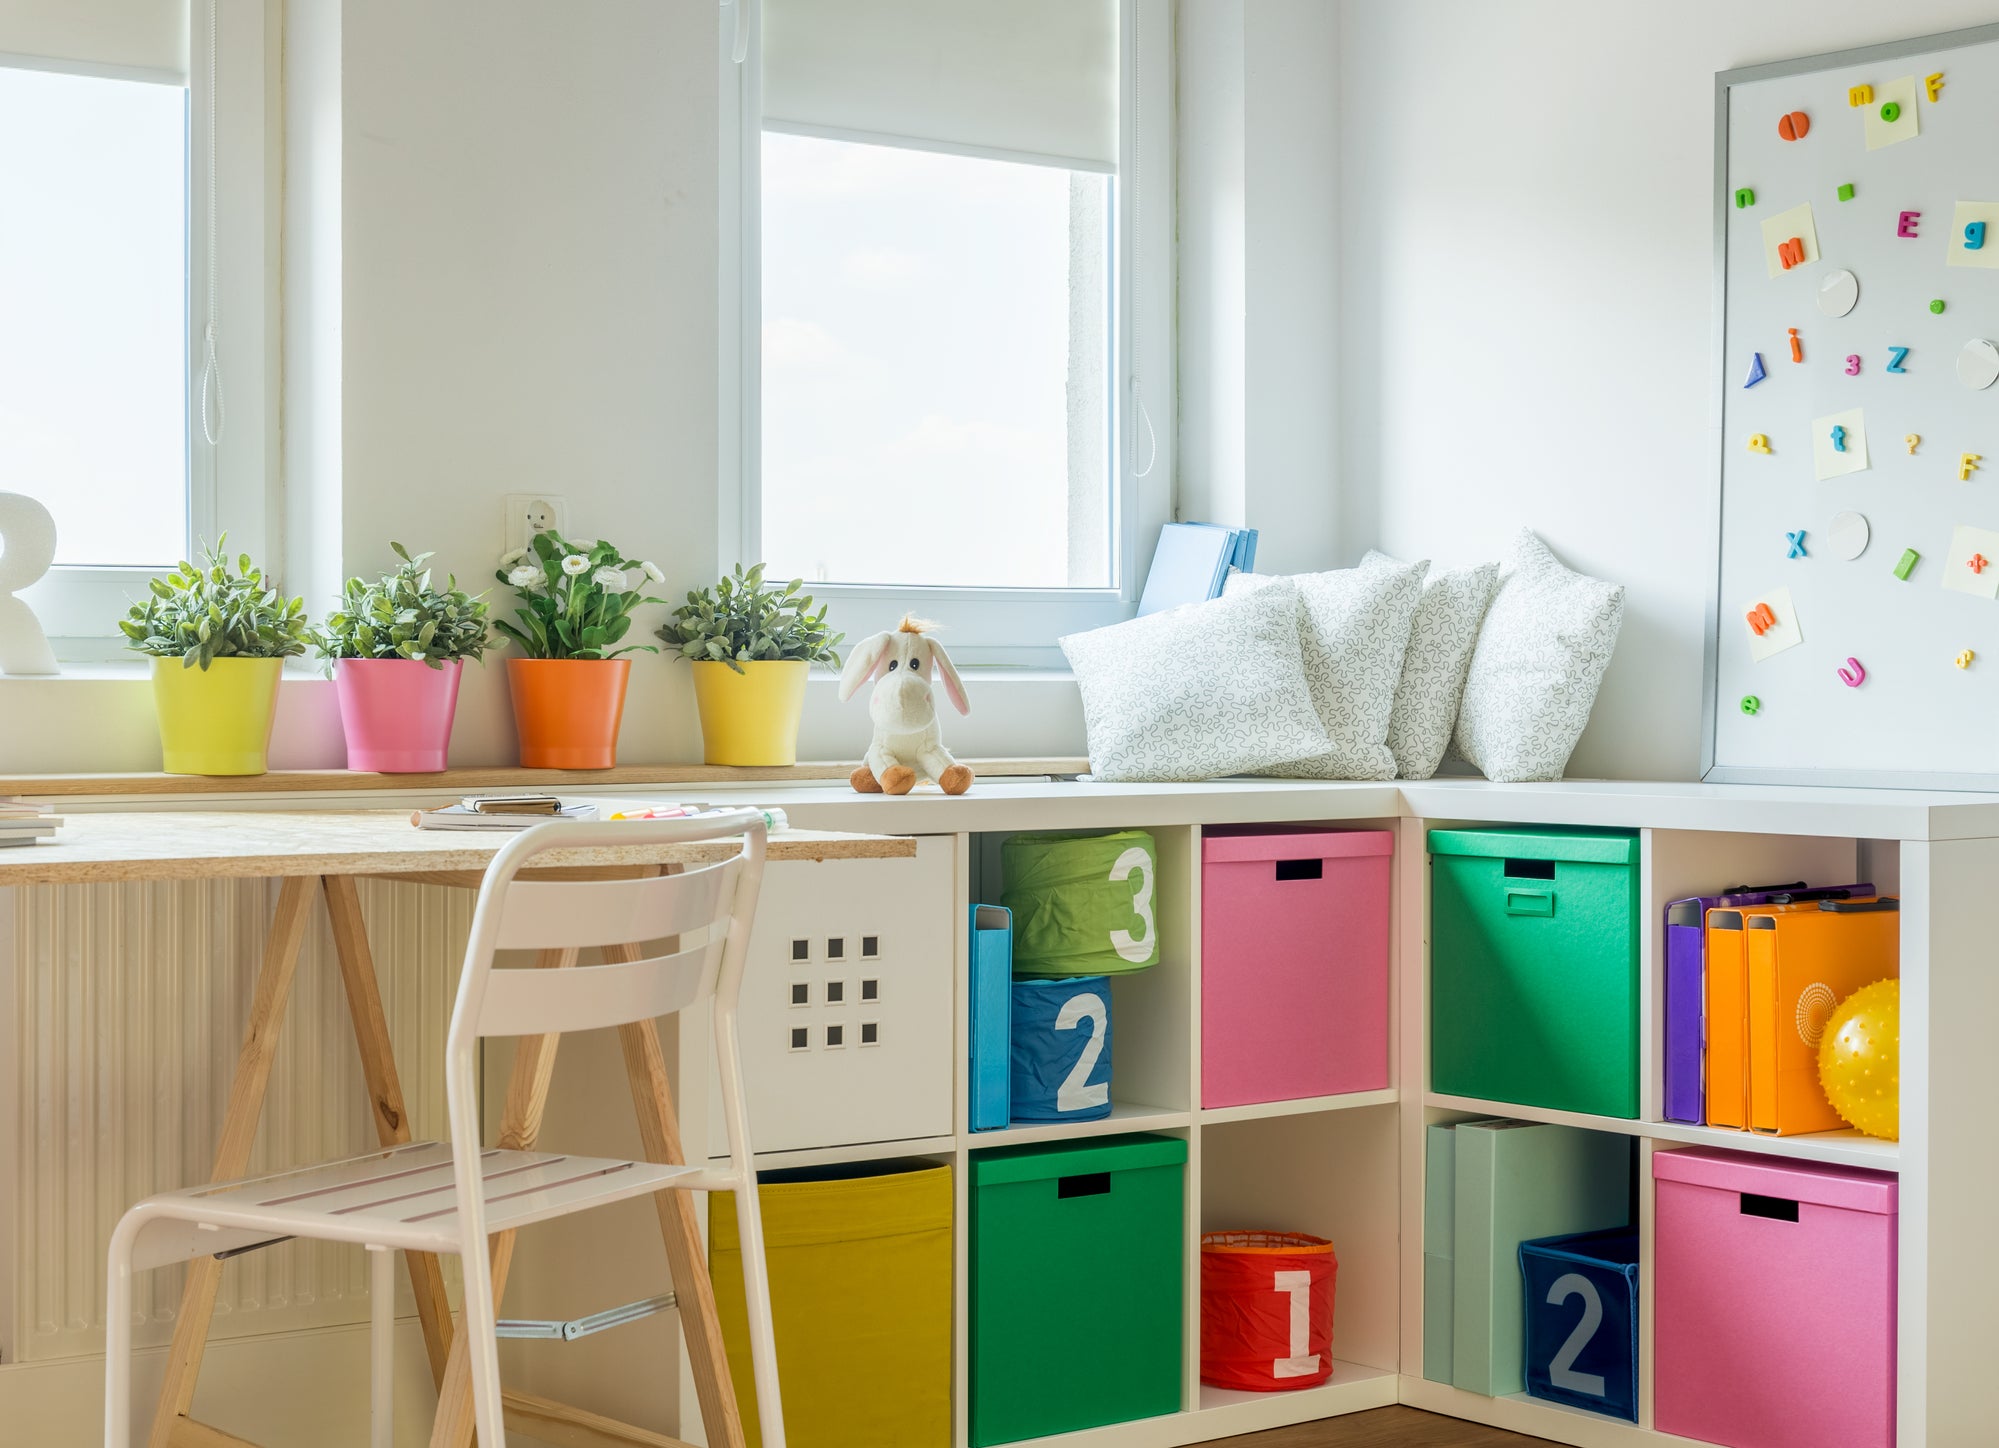 Kids desk with plants on it and storage area in bright colors